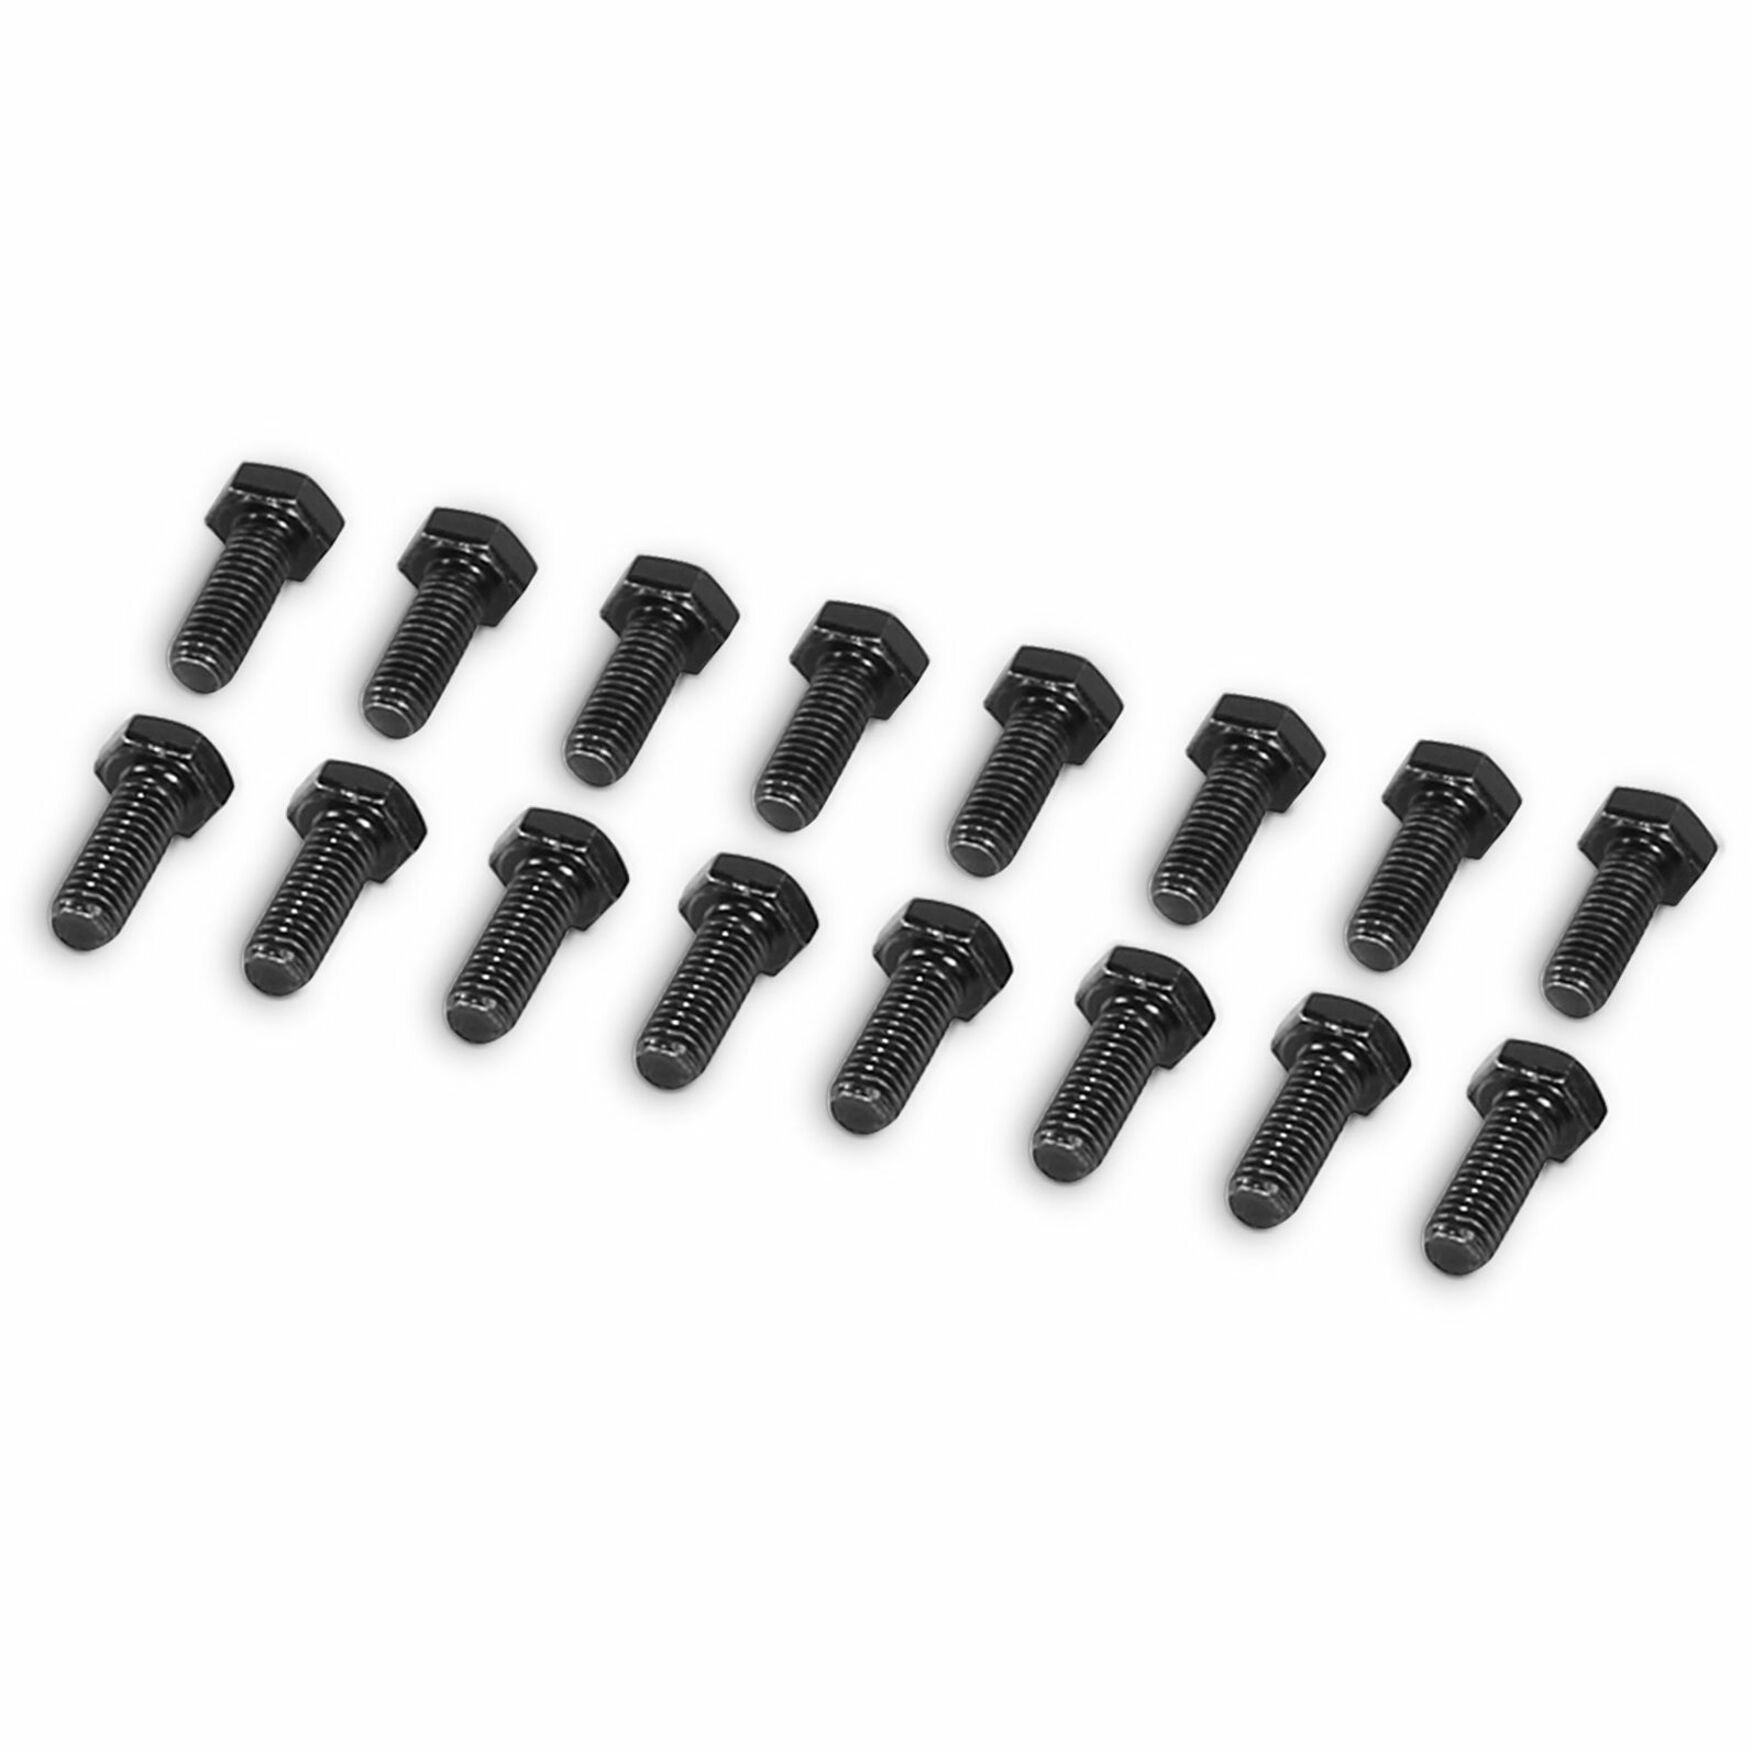 CyberPower CRA60002 Carbon Rack Caster Kit, 4 Per Pack, 5-Year Warranty